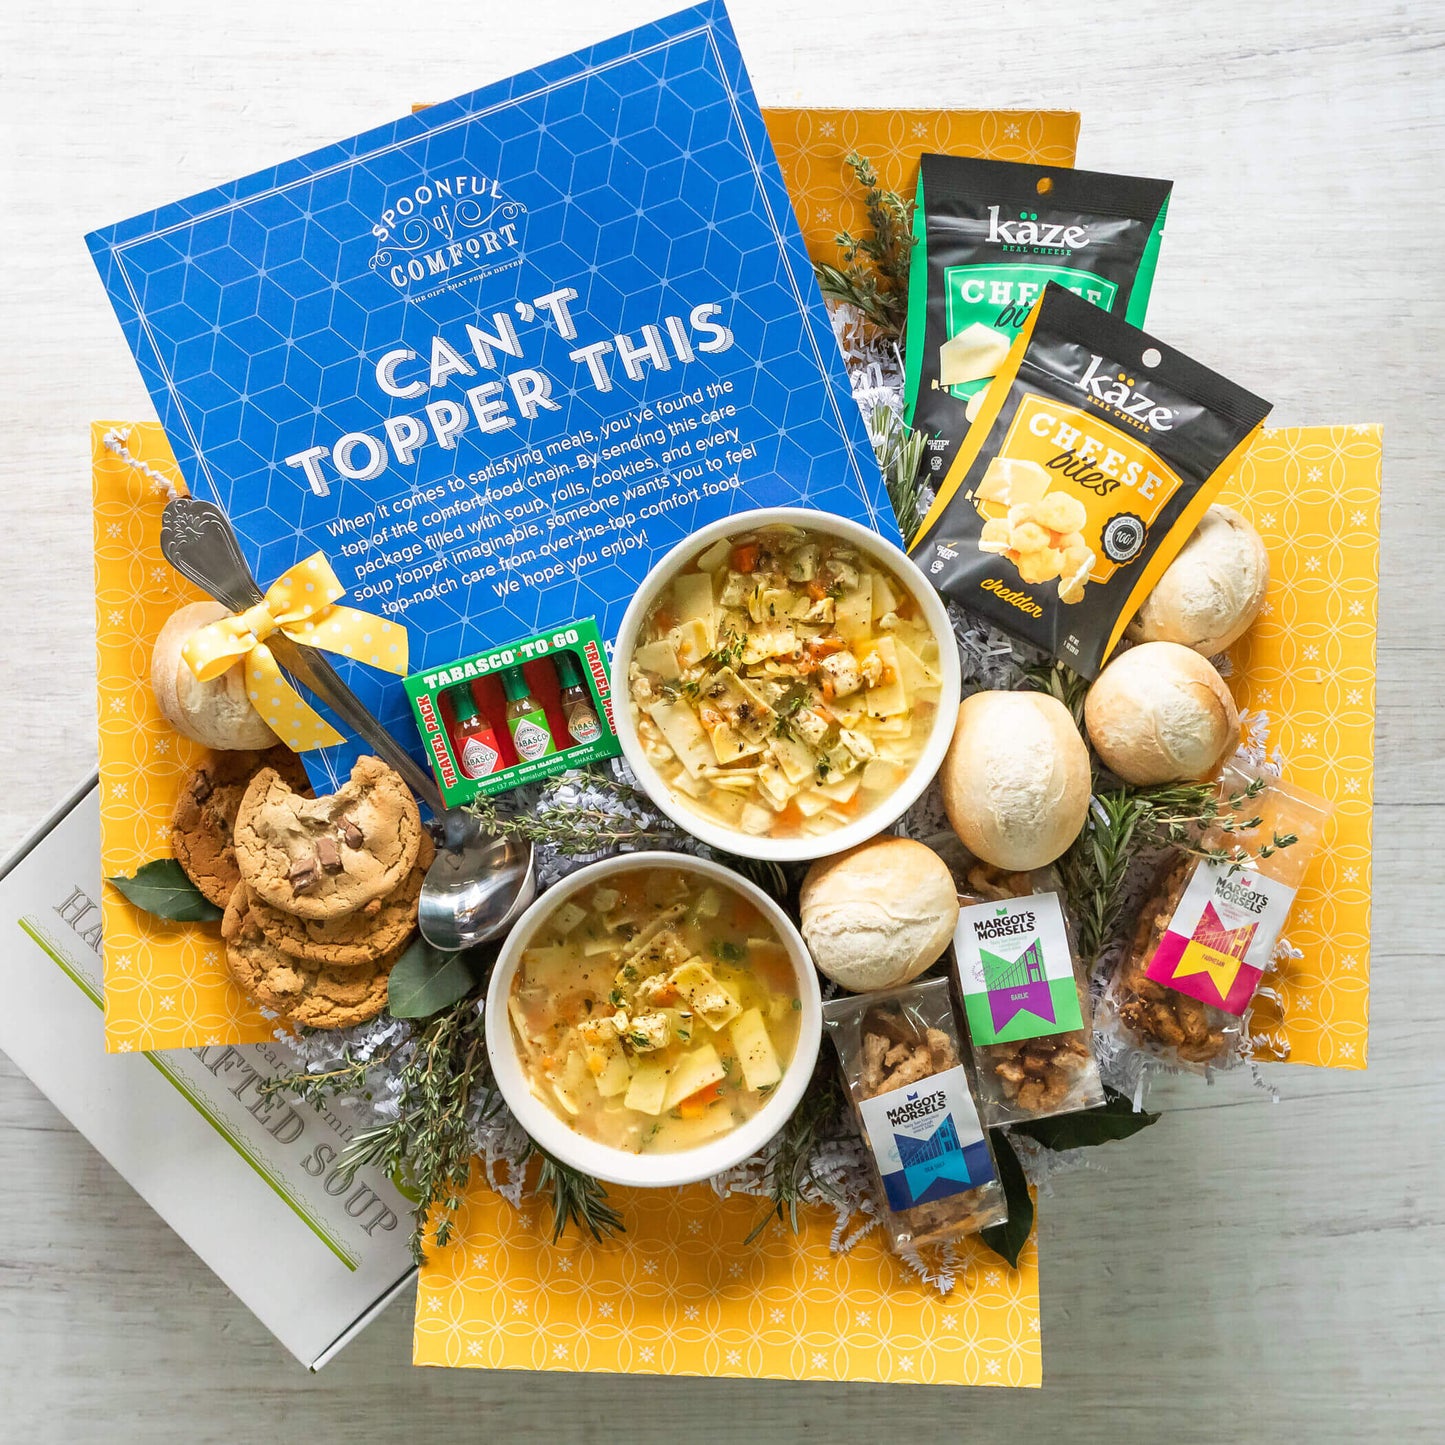 Can't Top this Package: Includes two bowls of soup surrounded by, cookies, rolls, croutons (garlic, parmesan, sea salt flavors), along with Kaze Cheese bites(gouda and cheddar), tabasco trio set. Also includes ladle and insert. Insert reads: Can't Topper This